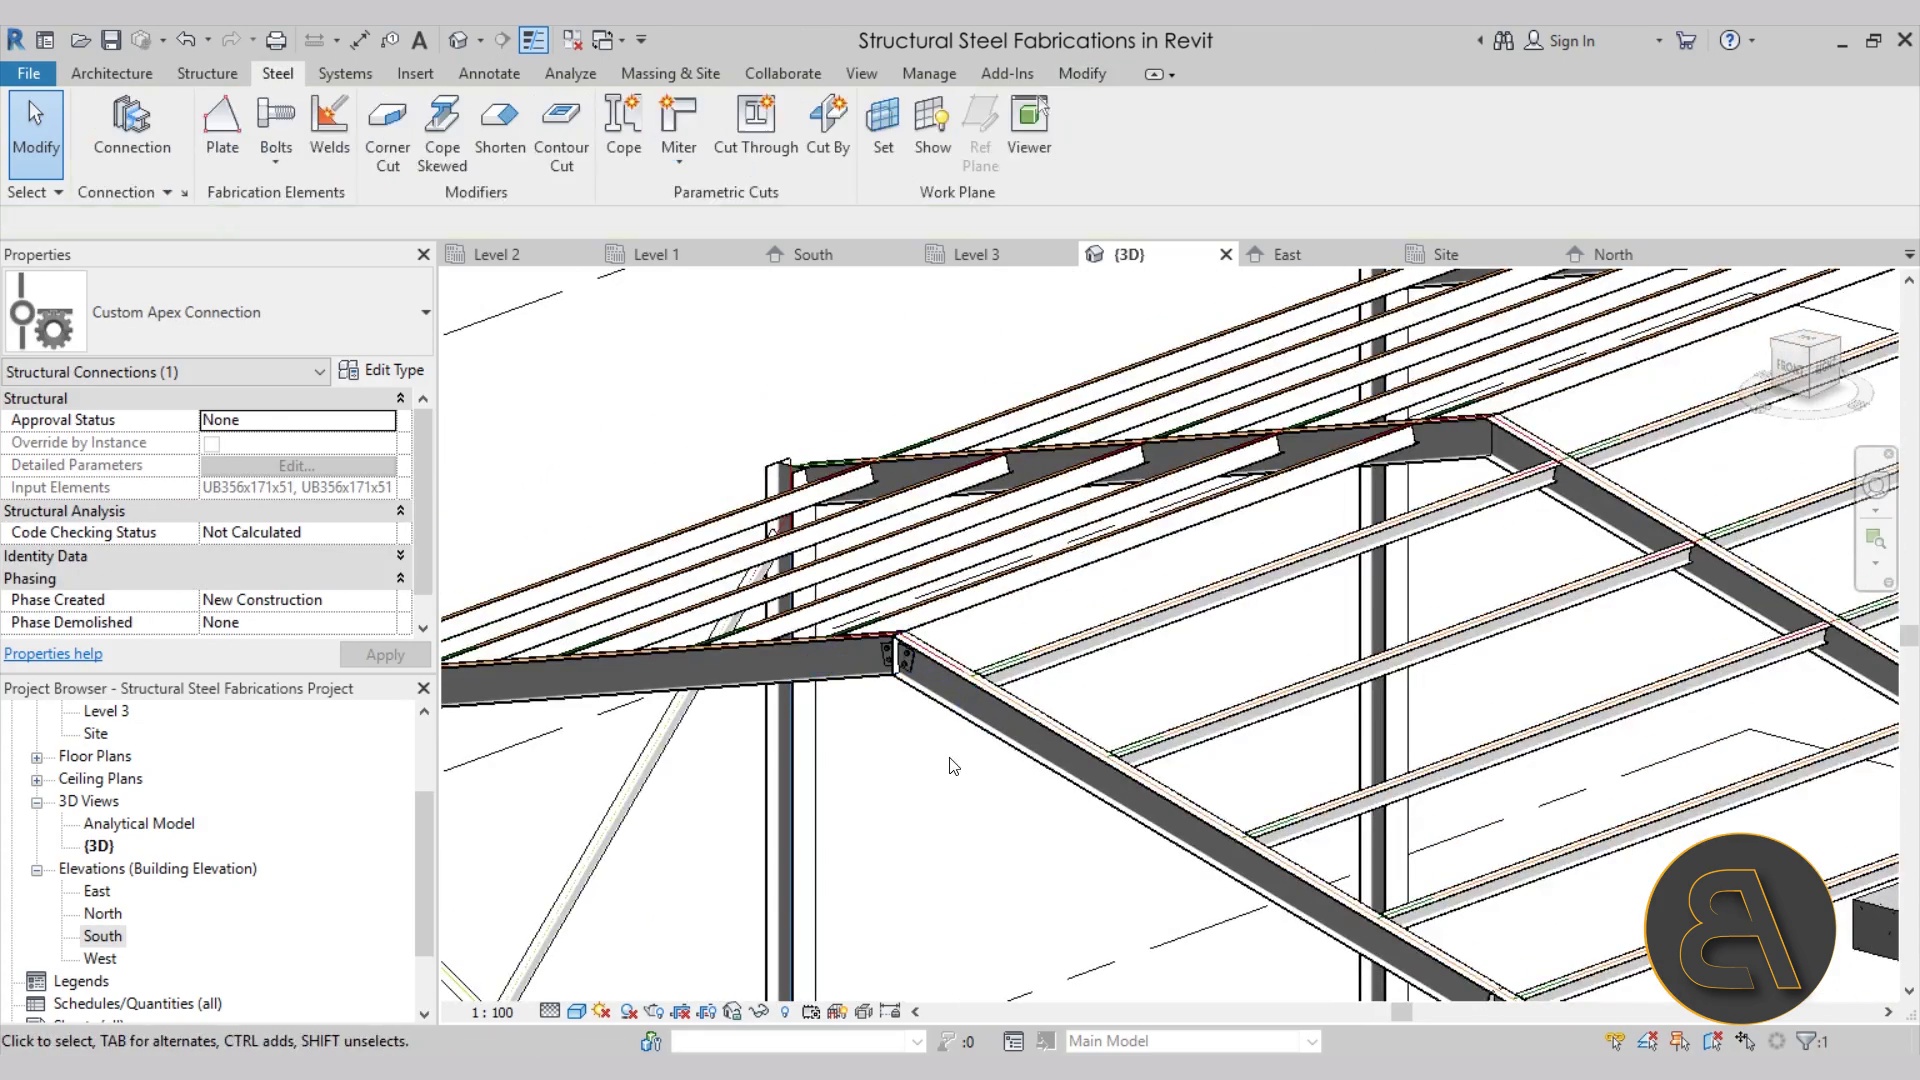 Structural Steel Fabrications in Revit